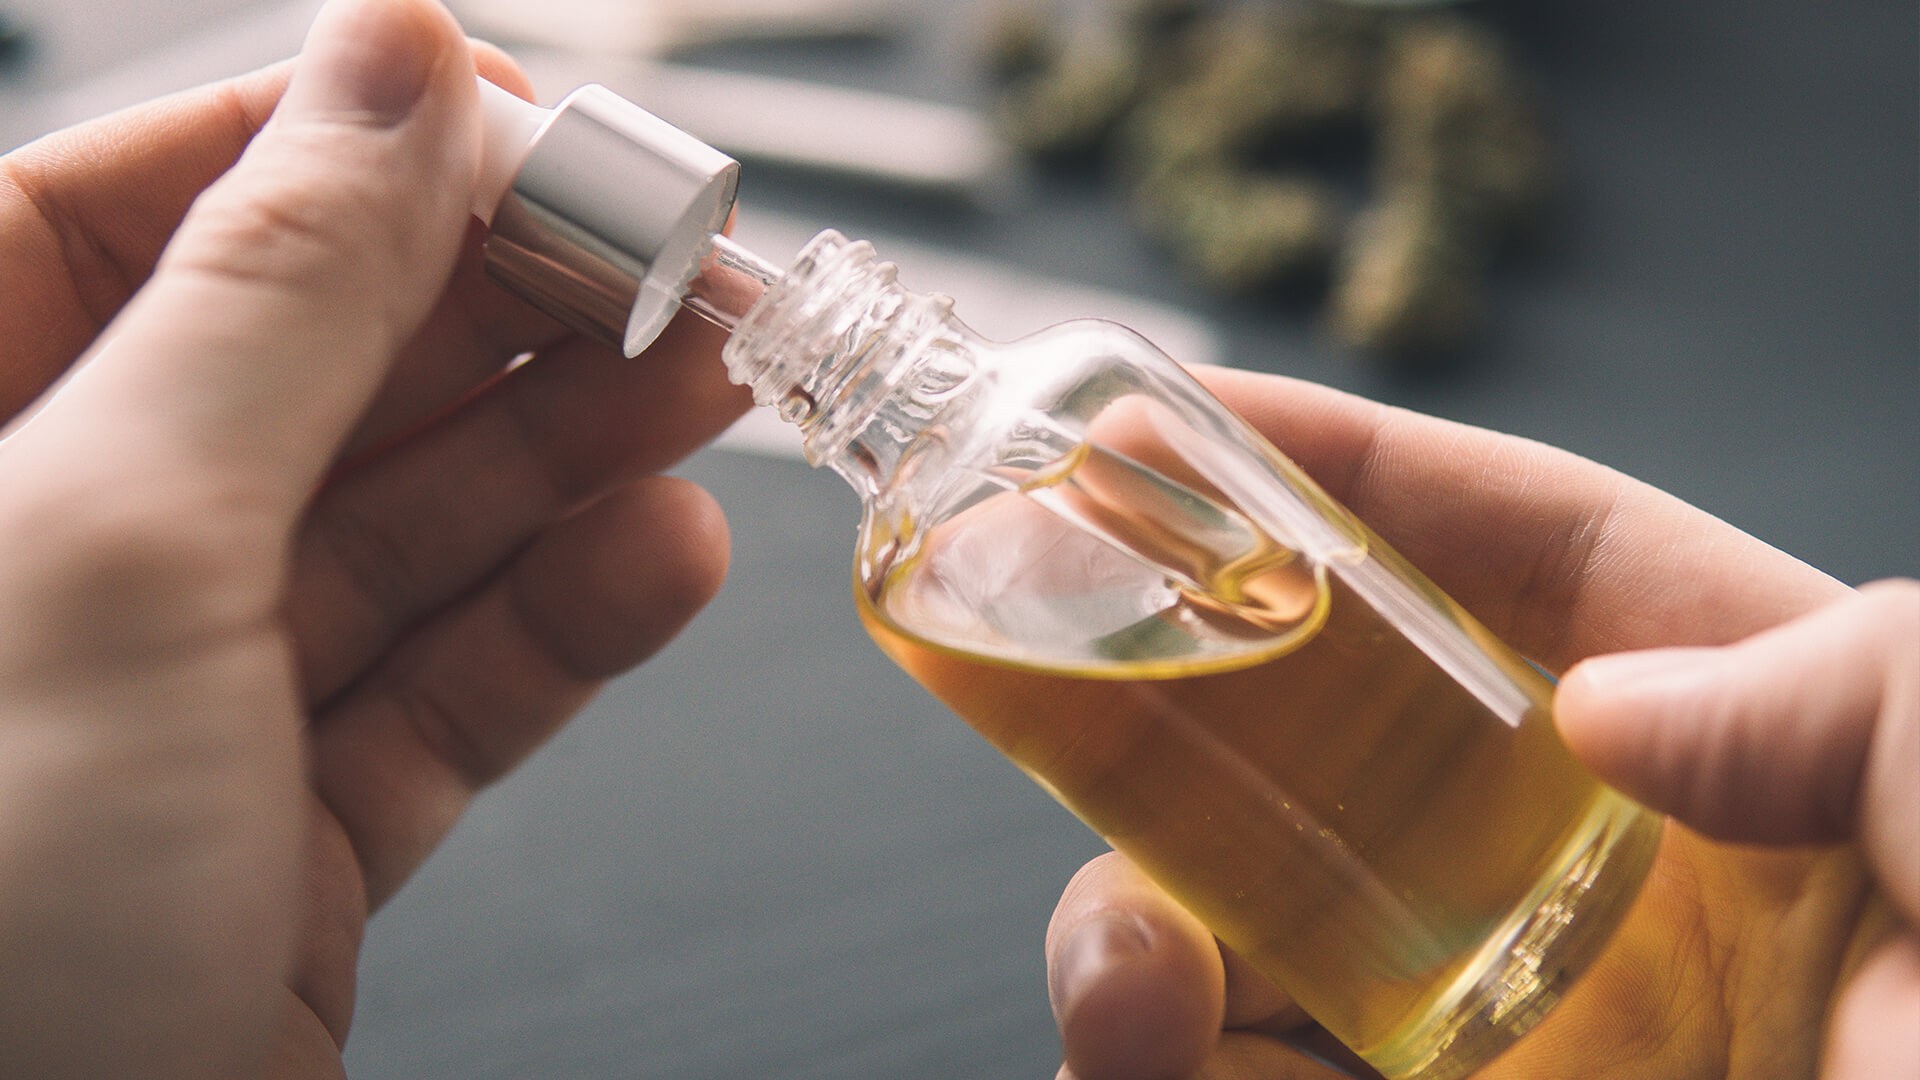 How Safe Are CBD Products?